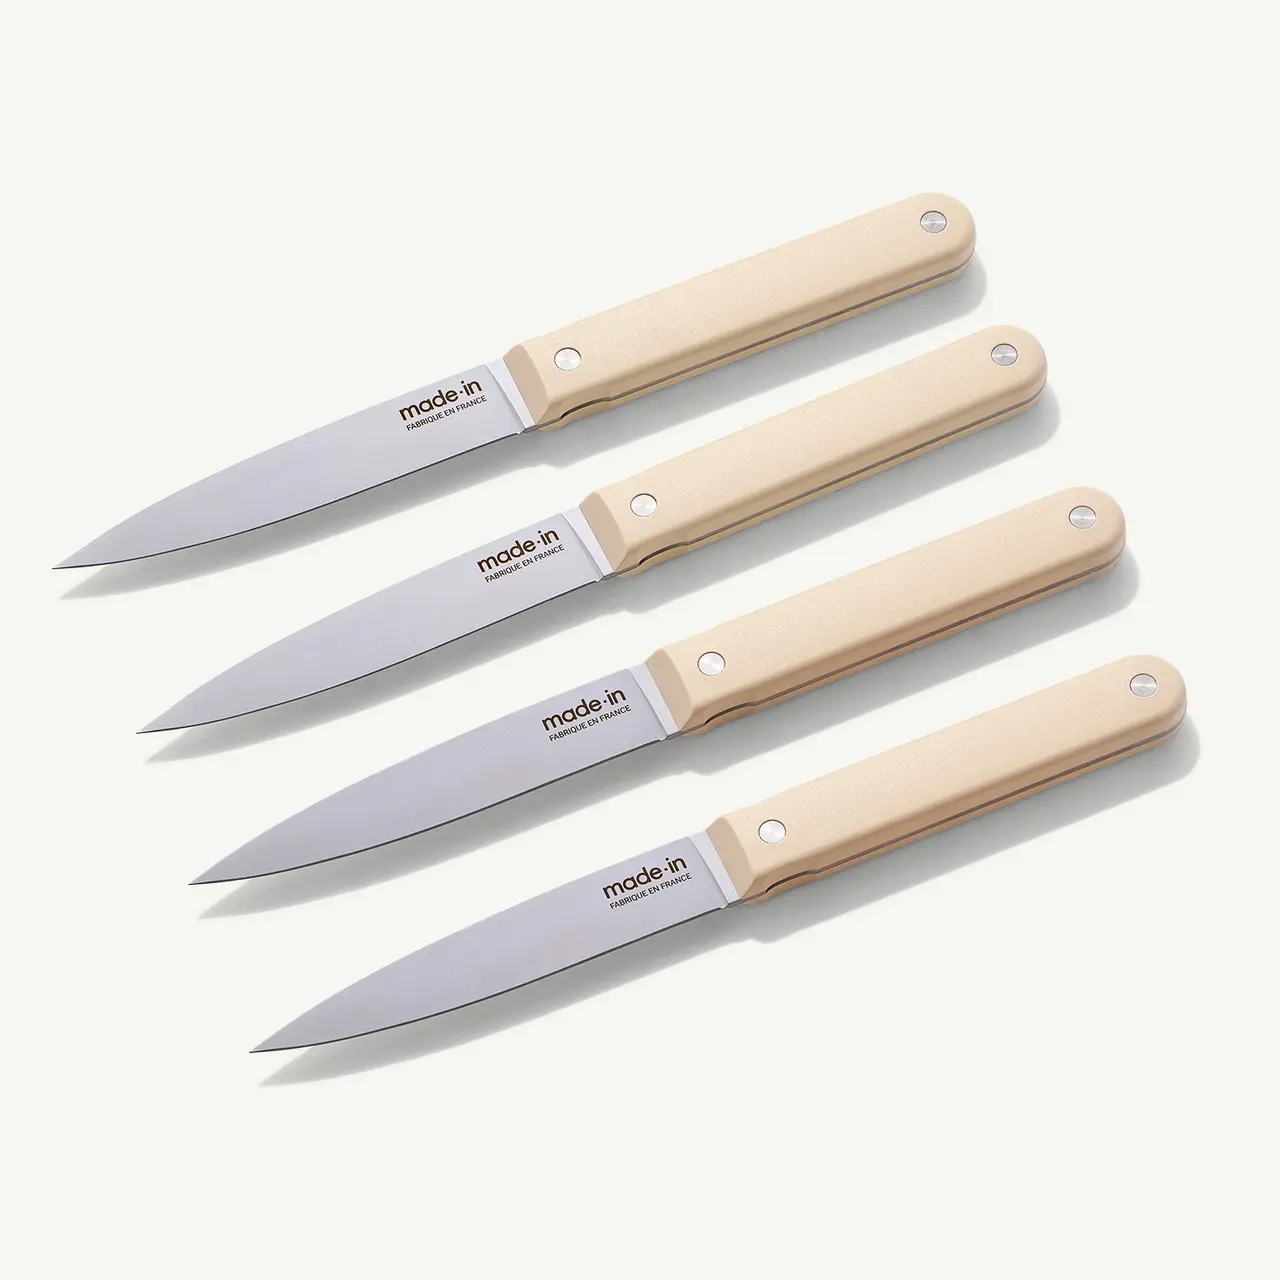 Four identical kitchen knives with beige handles are neatly aligned on a light background.